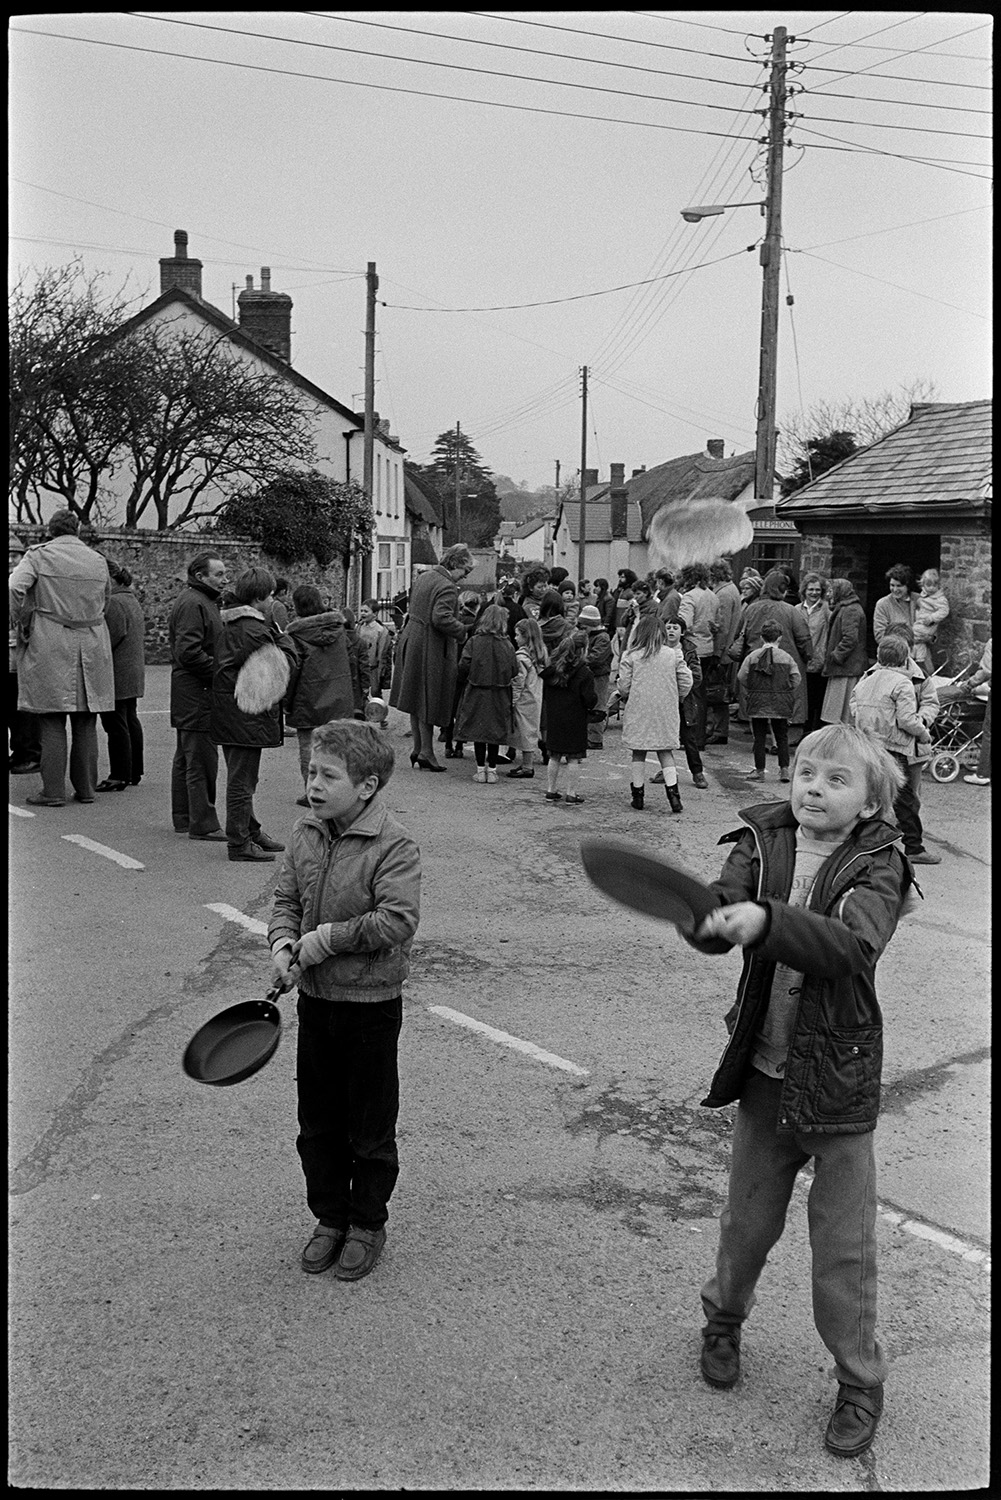 Shrove Tuesday Pancake Race in village street, children's races.
[Two boys holding frying pans and tossing pancakes into the air in Fore Street, Dolton in a Shrove Tuesday Pancake Race. In the background there is a crowd of men, women and children in the road and a view of thatched houses.]